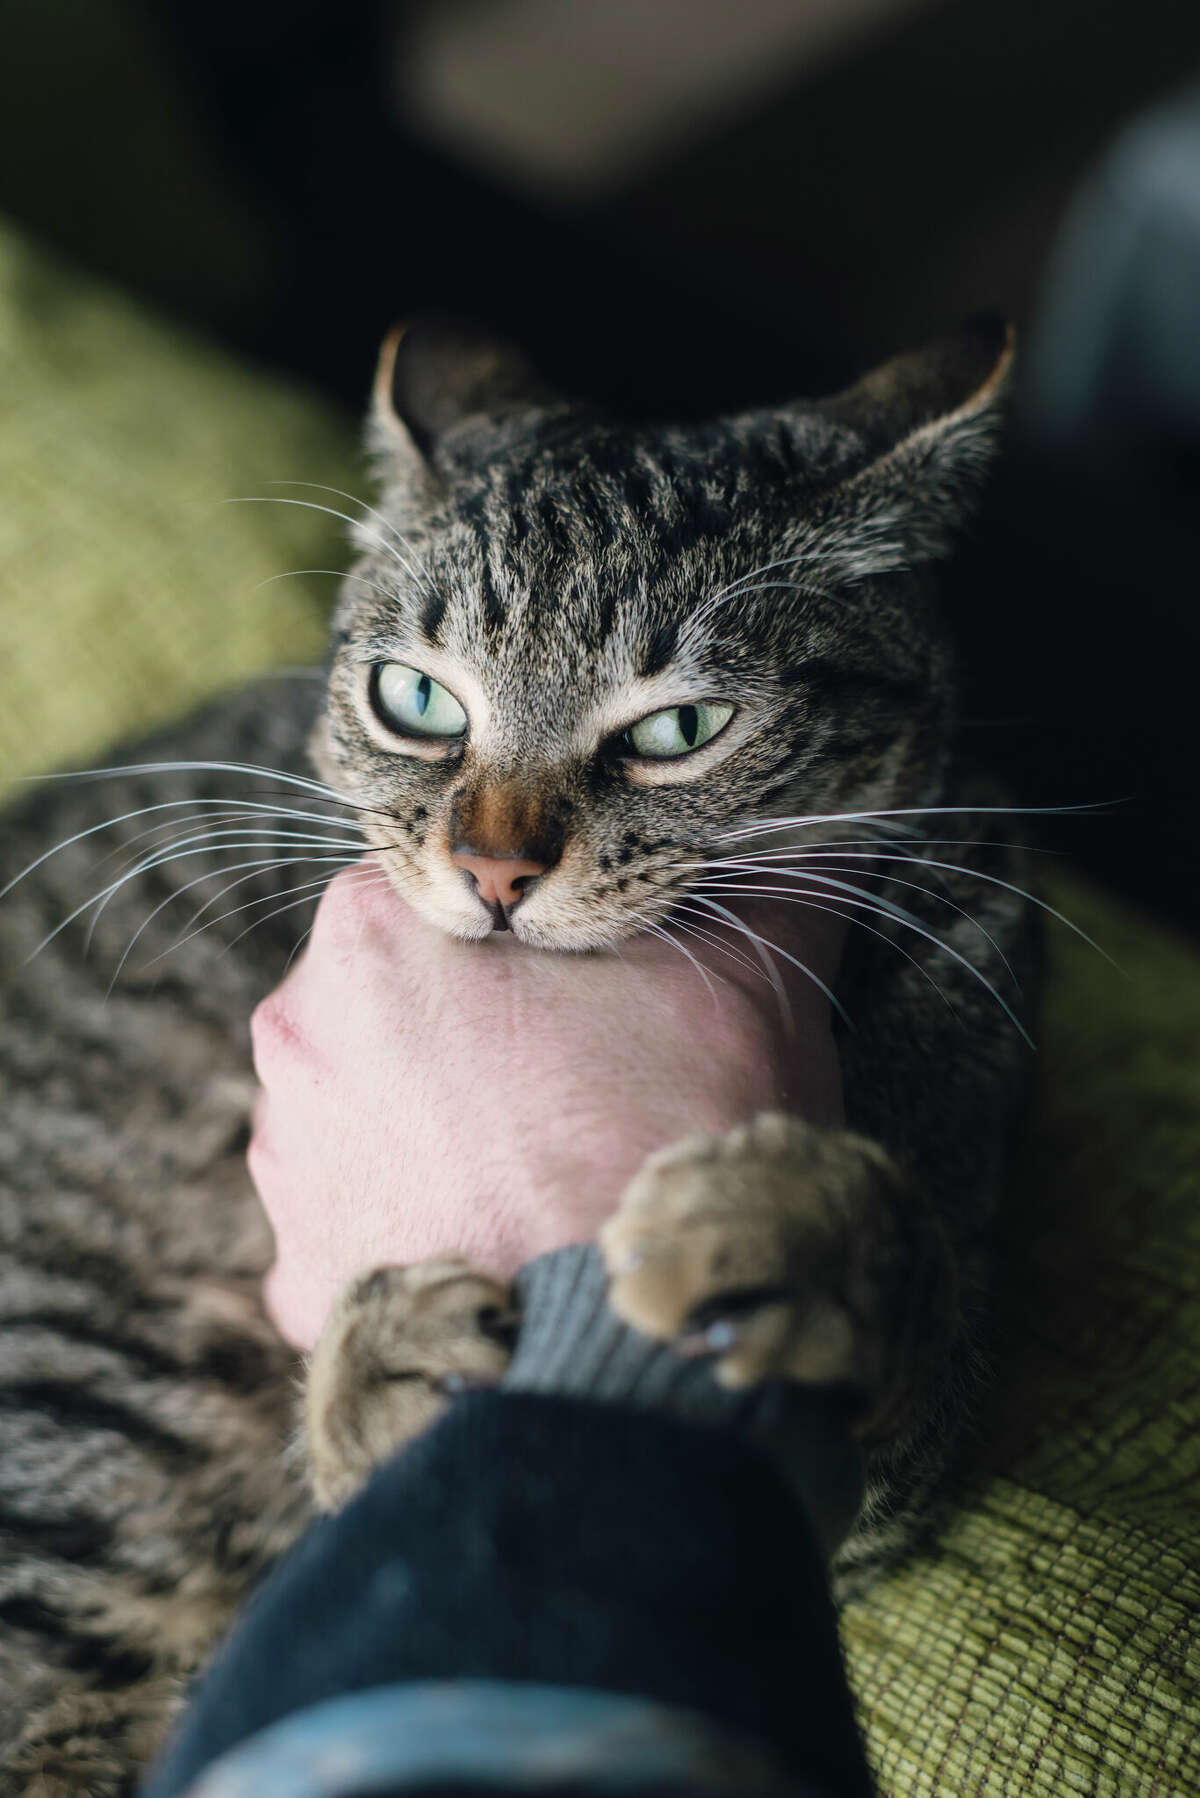 Cat bites carry a risk of serious infection and even surgery, not mention the risk of rabies if the cat is feral. 